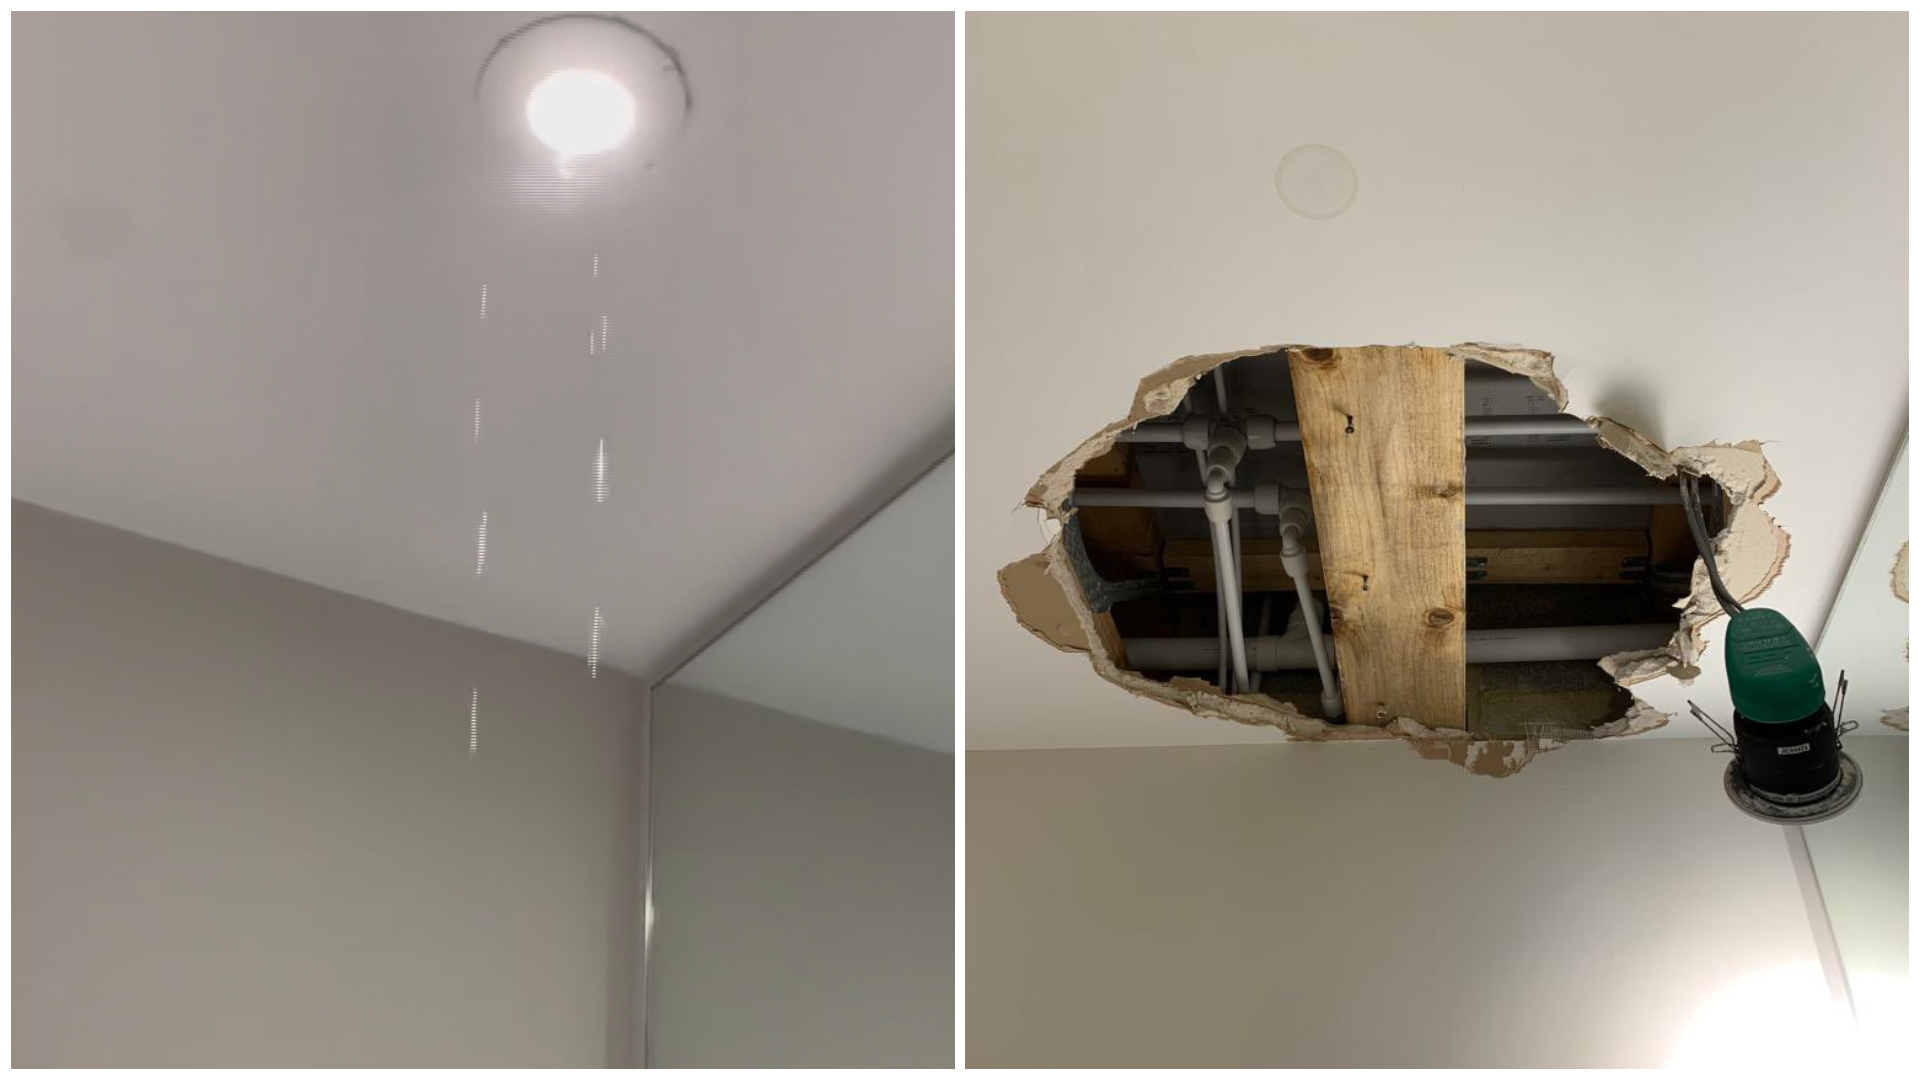 south-east-water-customer-left-with-hole-in-bathroom-ceiling-due-to